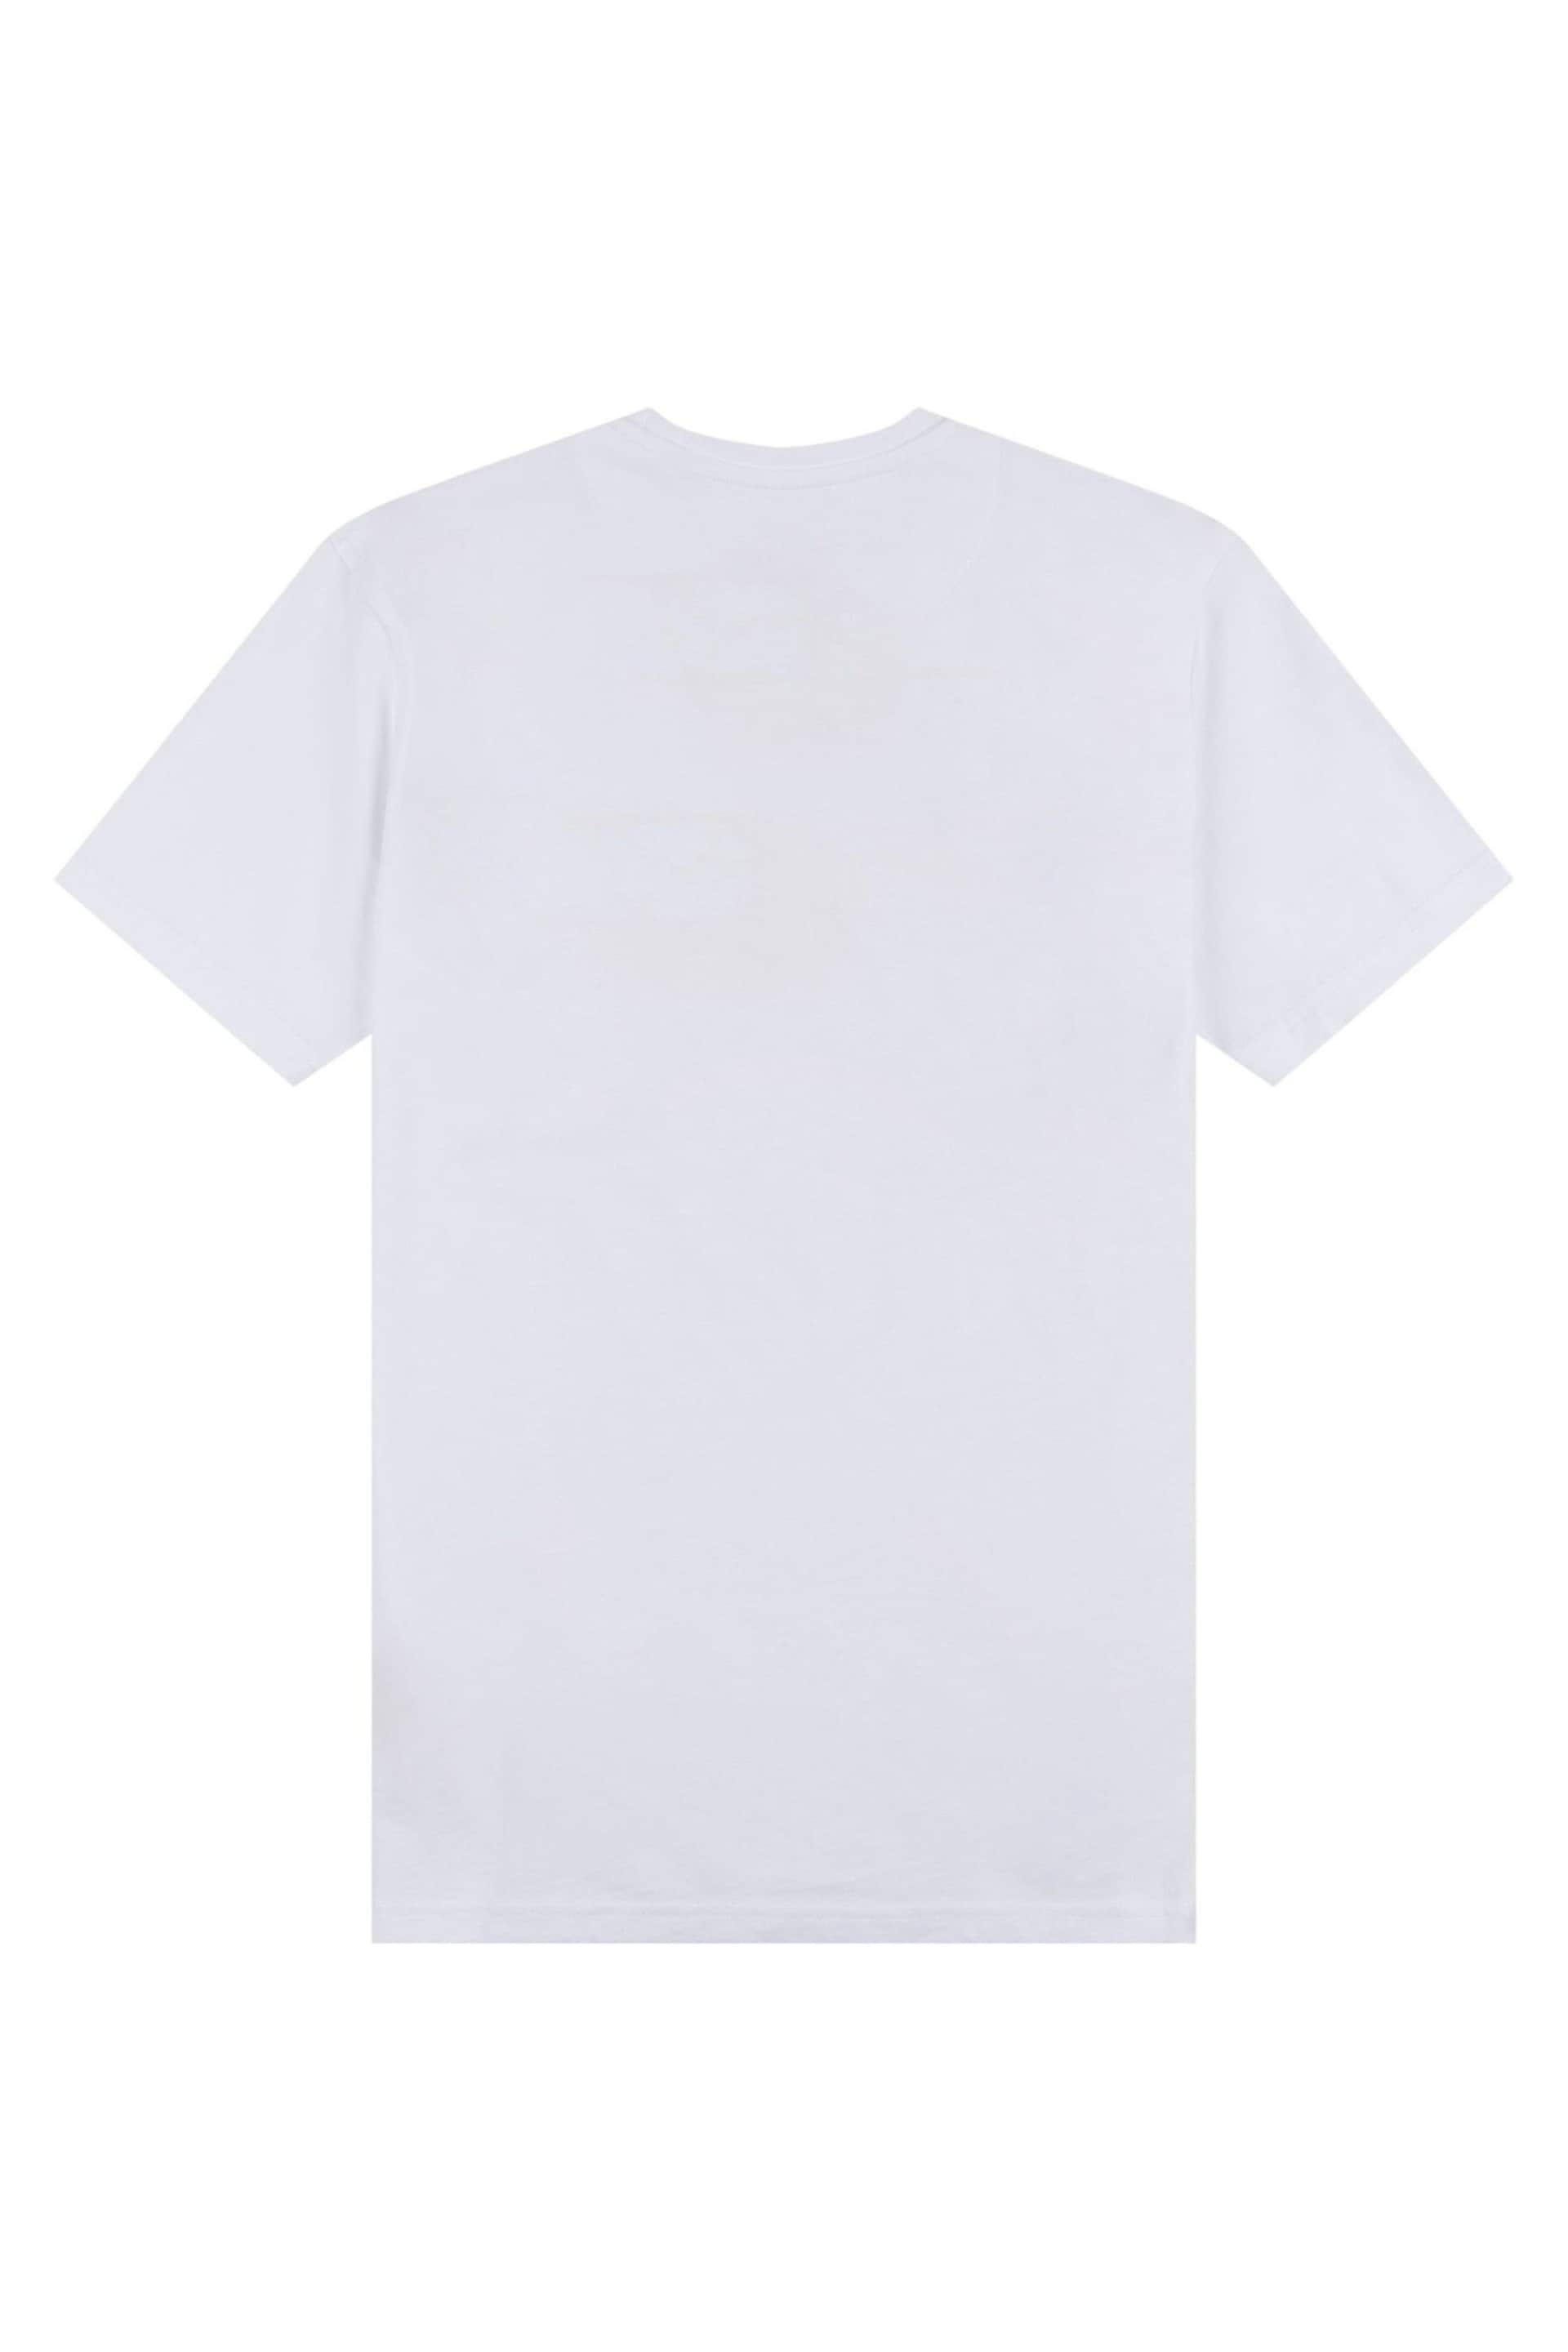 Flyers Mens Classic Fit Plane T-Shirt - Image 7 of 8